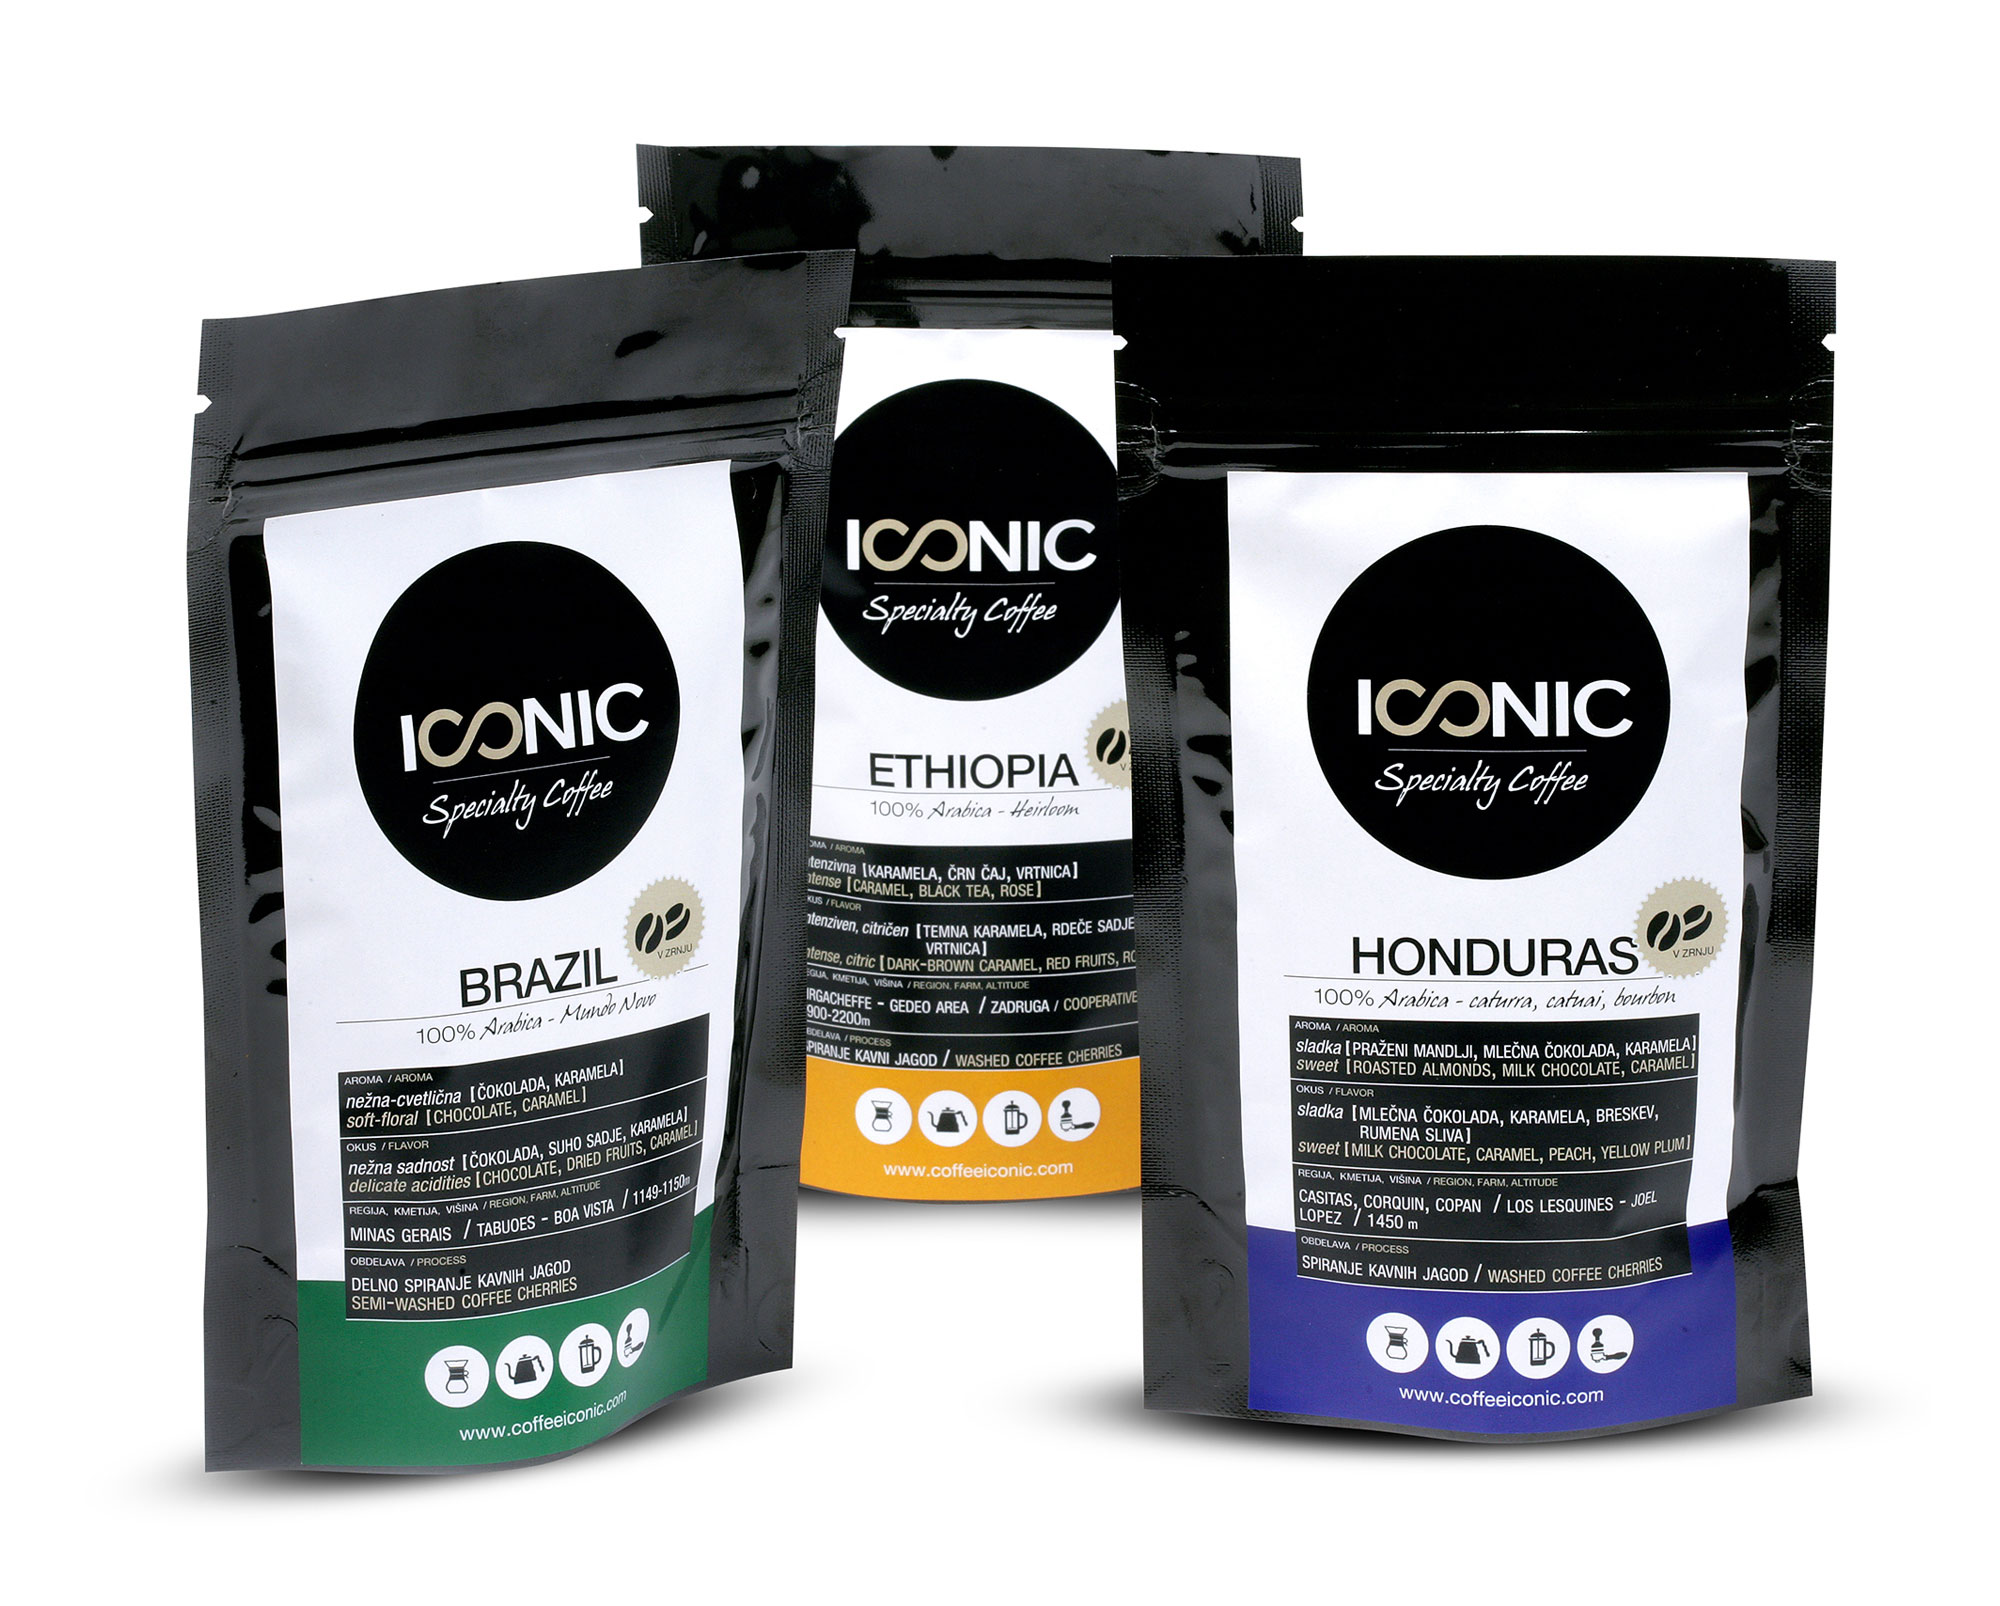 Iconic Specialty Coffee